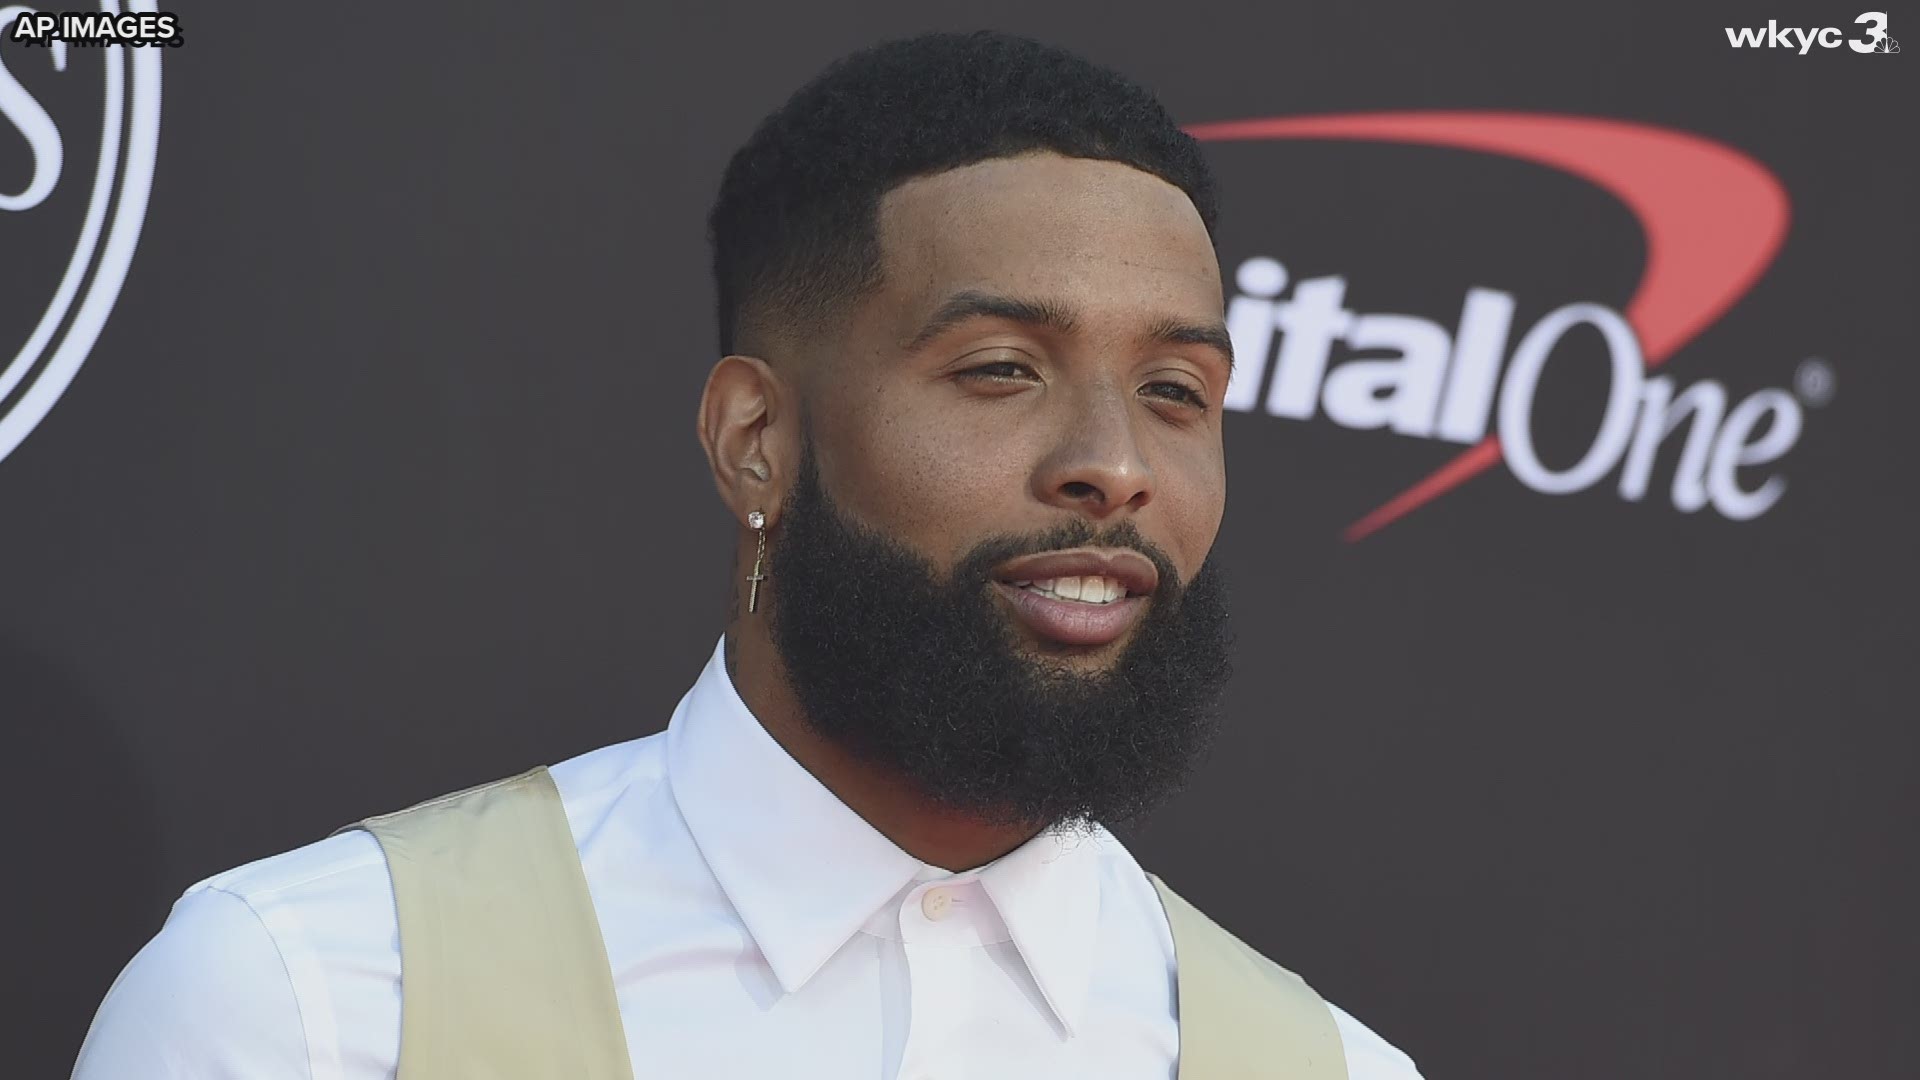 Odell Beckham Jr. opened up about a lot of topics in an interview with GQ Magazine.